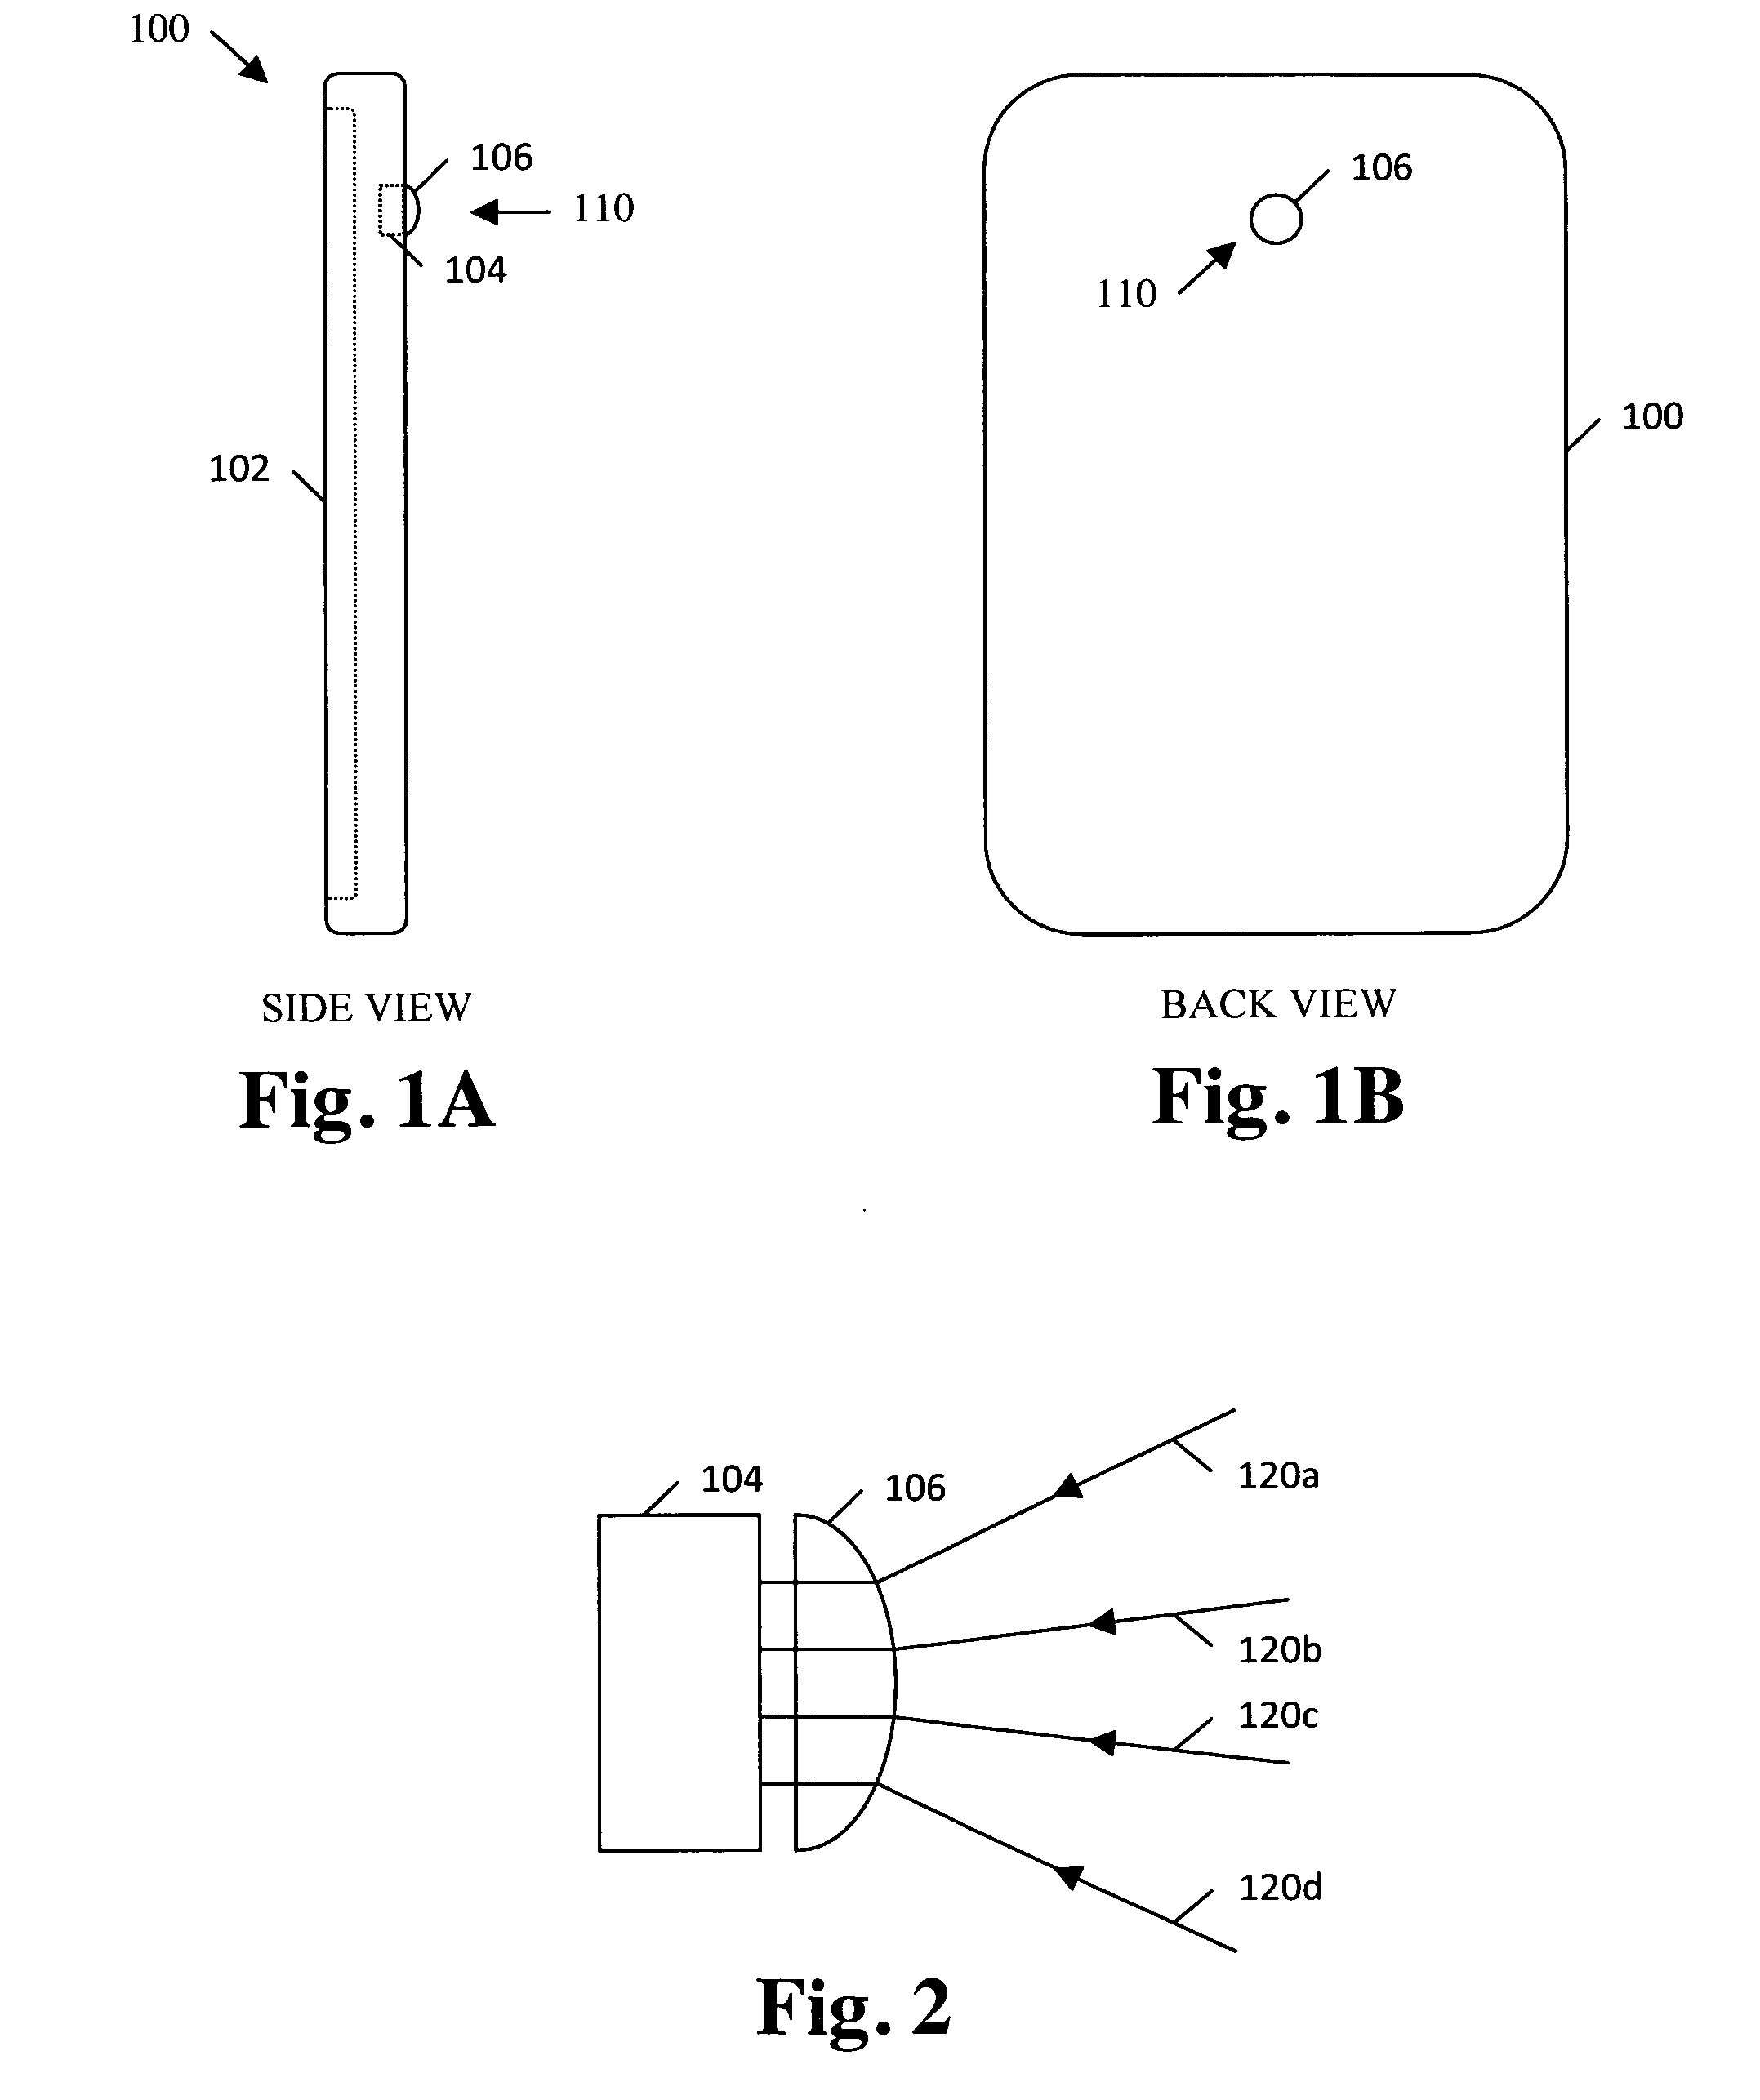 Optical adapters for mobile devices with a camera